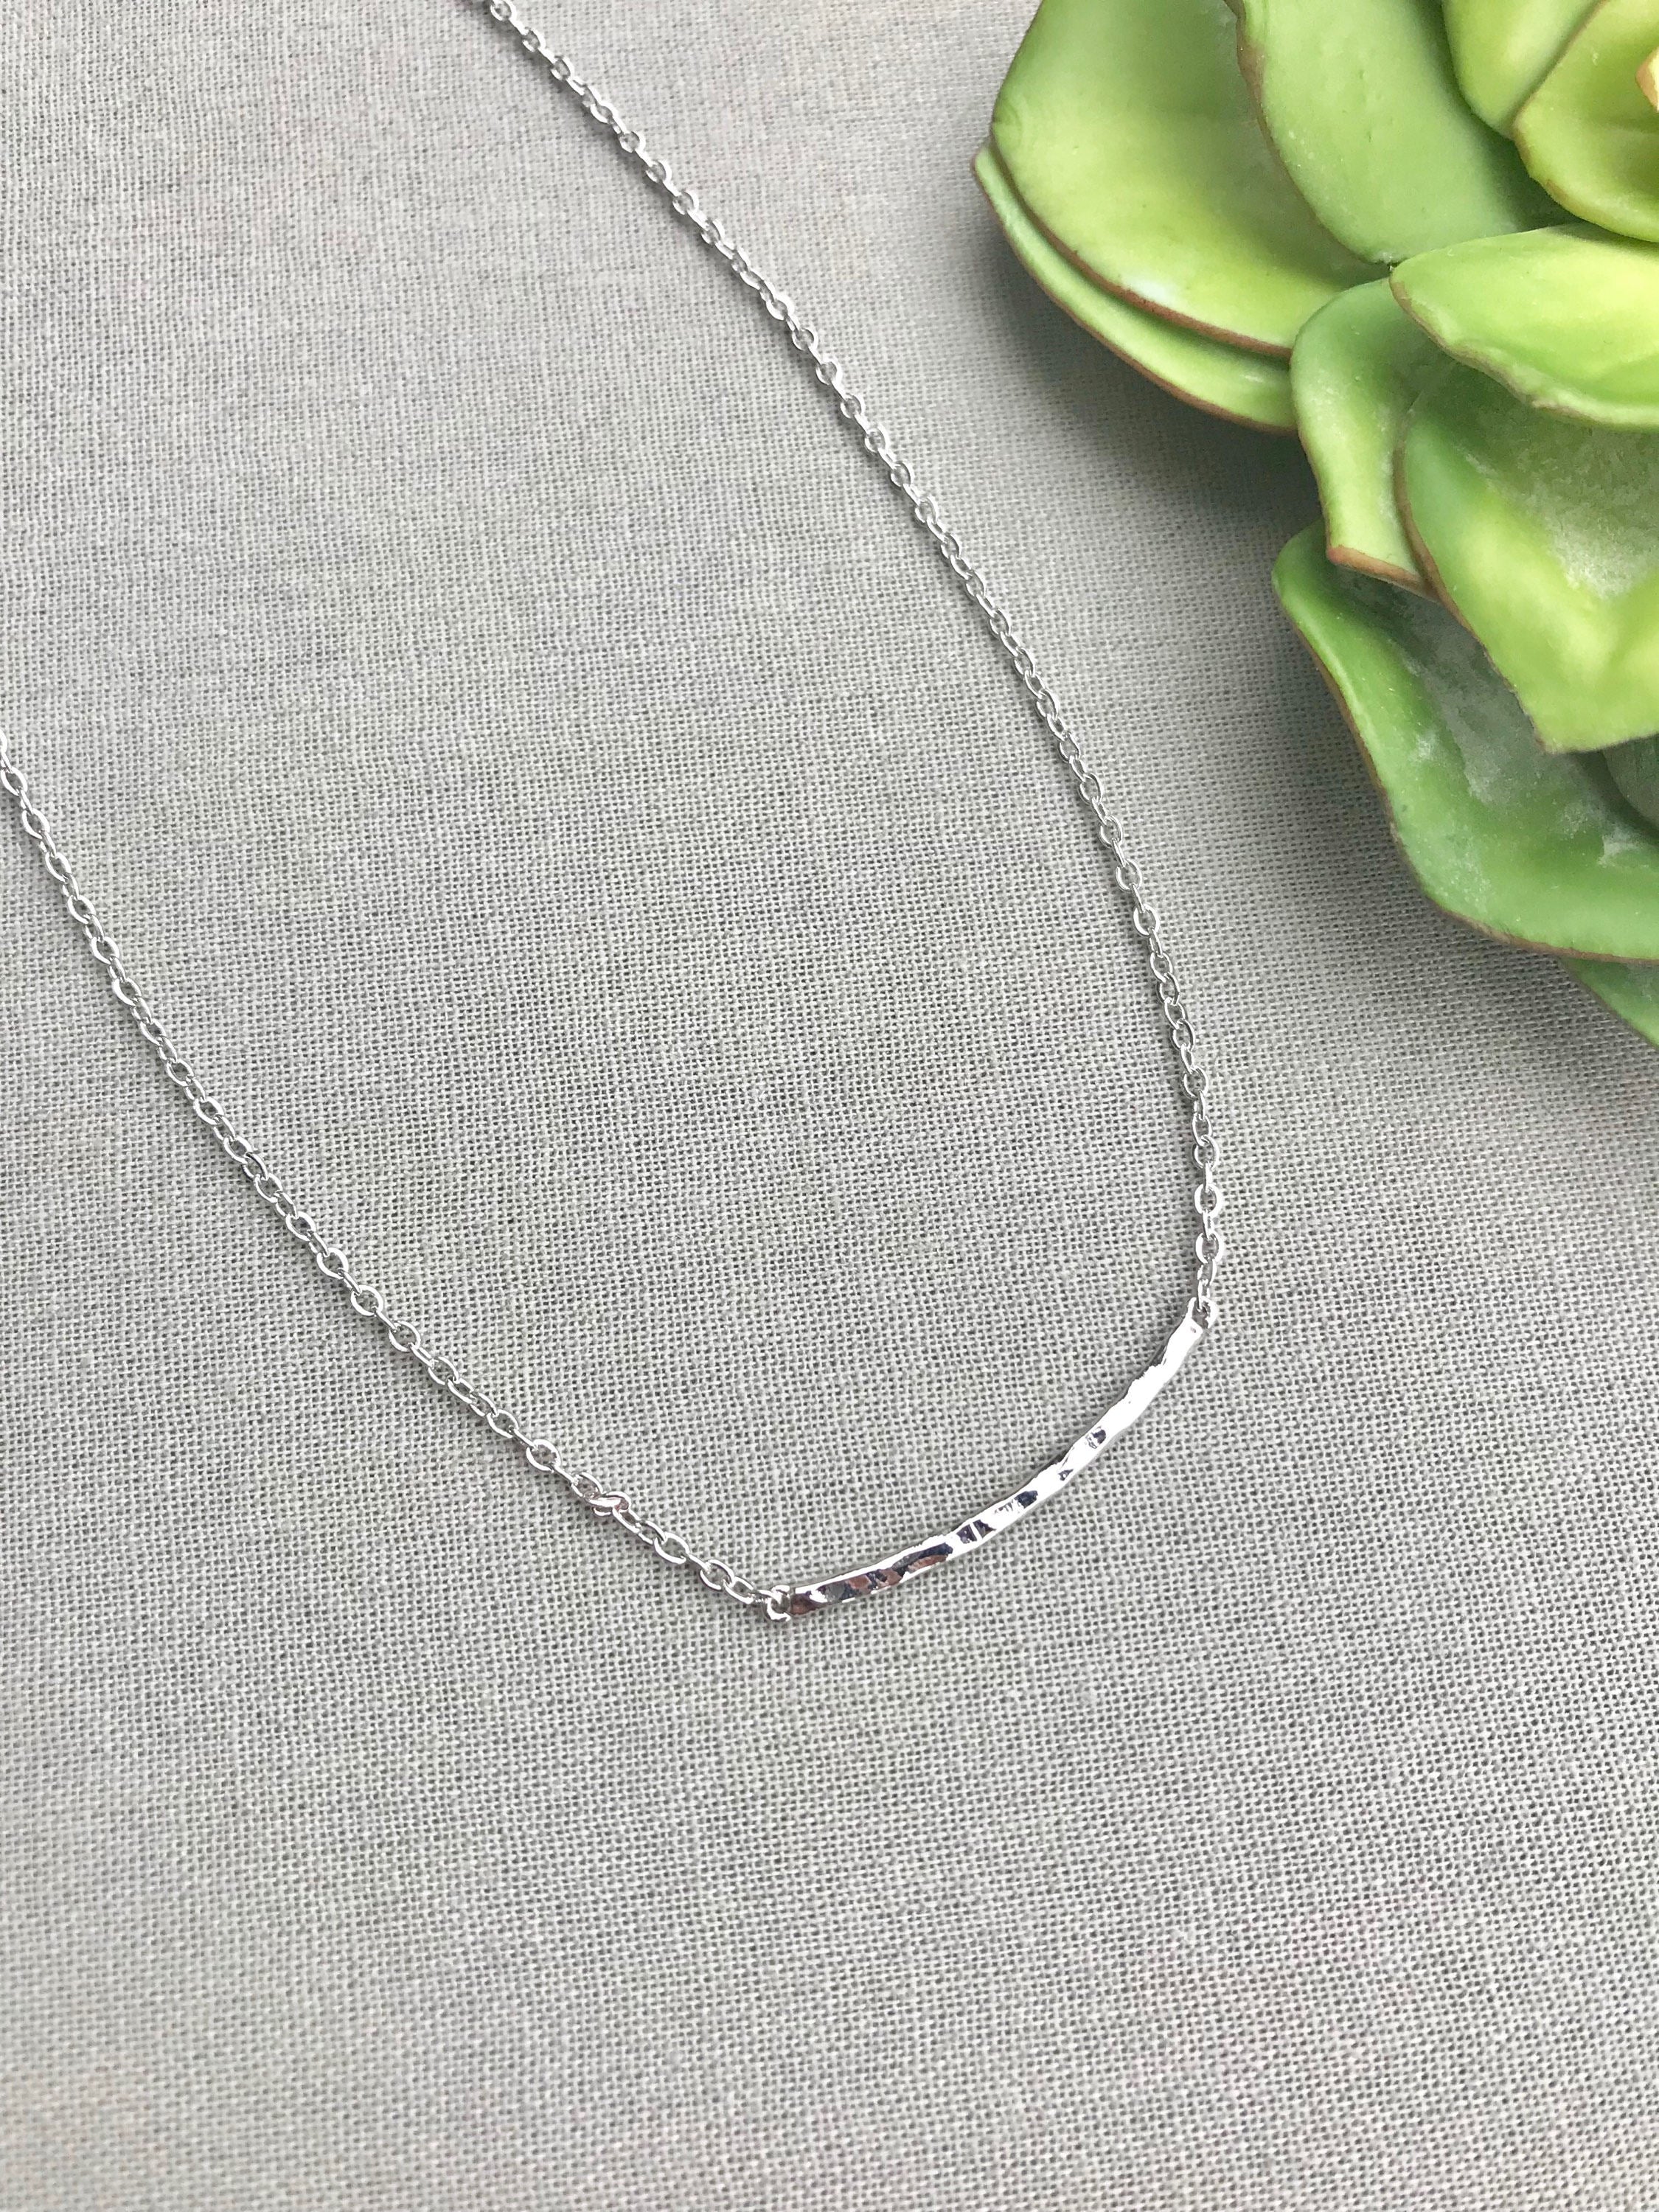 Dainty Silver Curved Bar Necklace